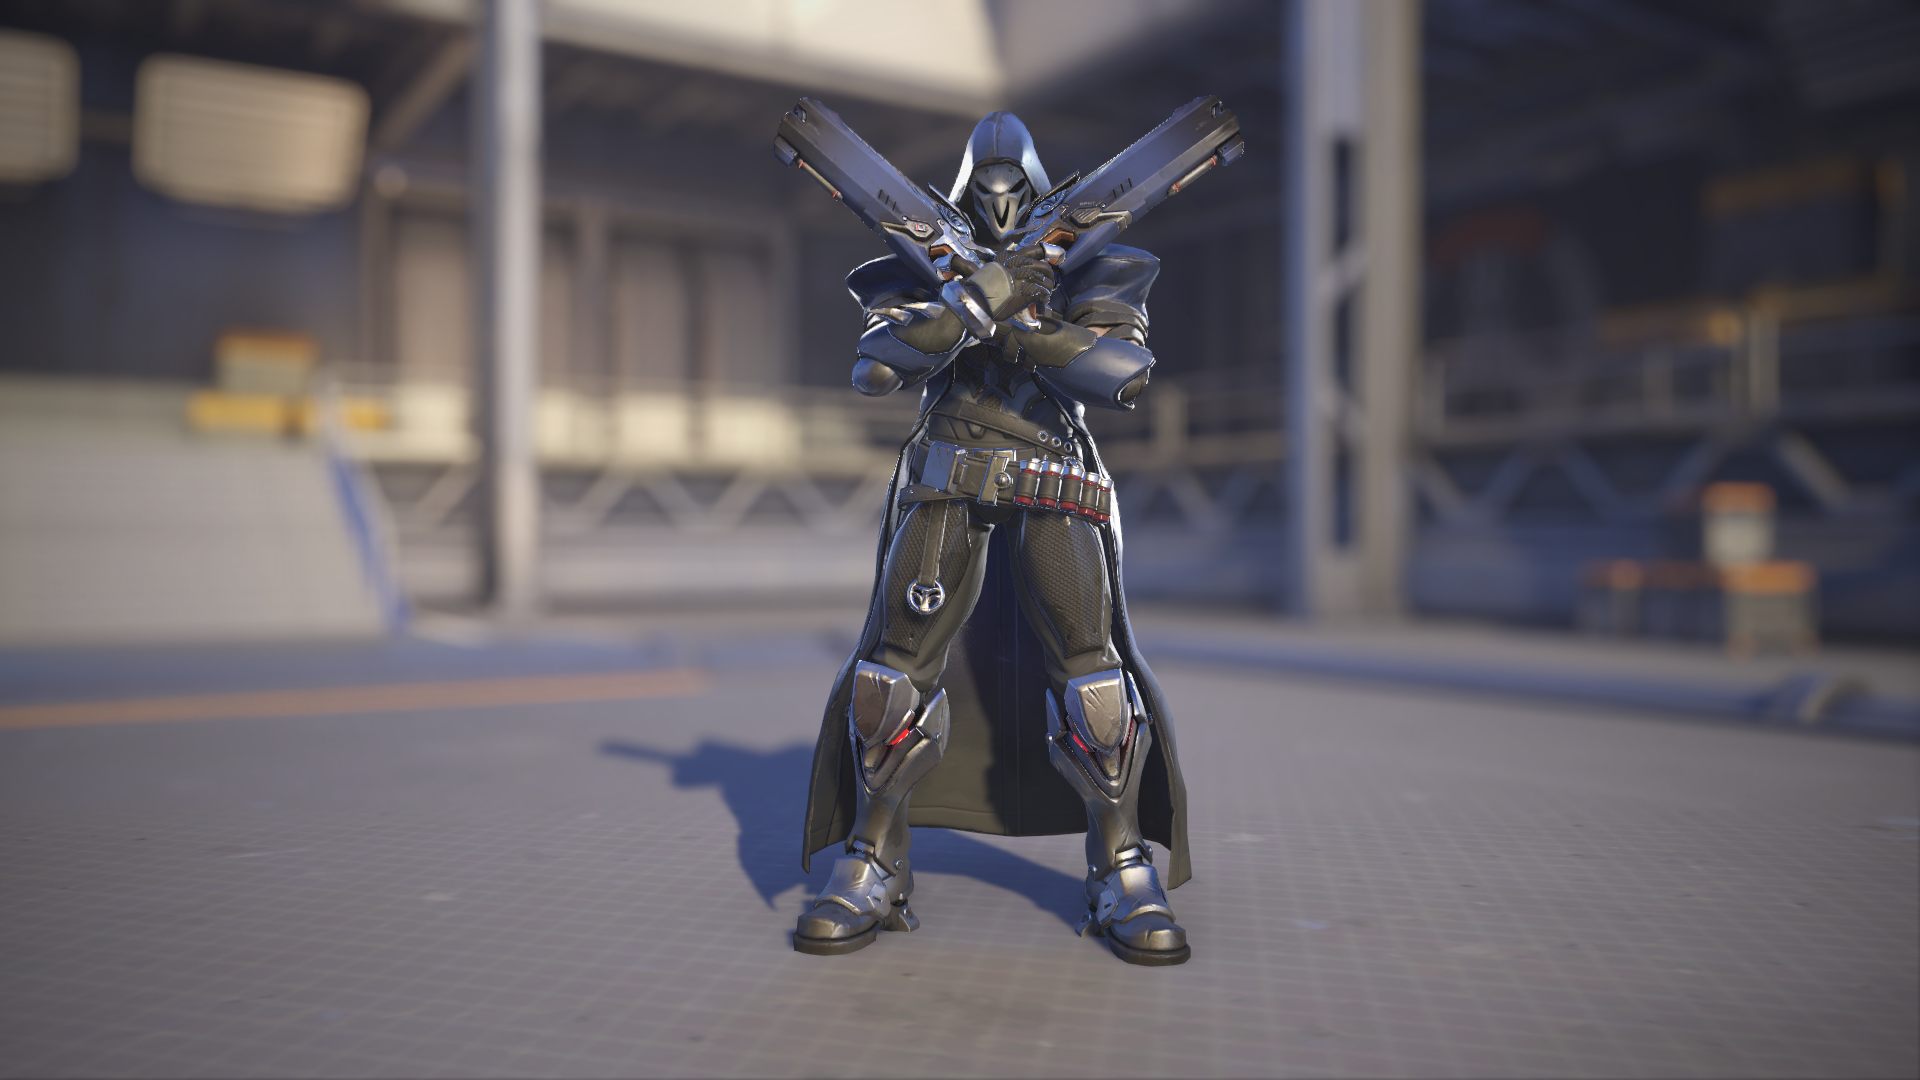 Reaper models his Midnight skin in Overwatch 2.